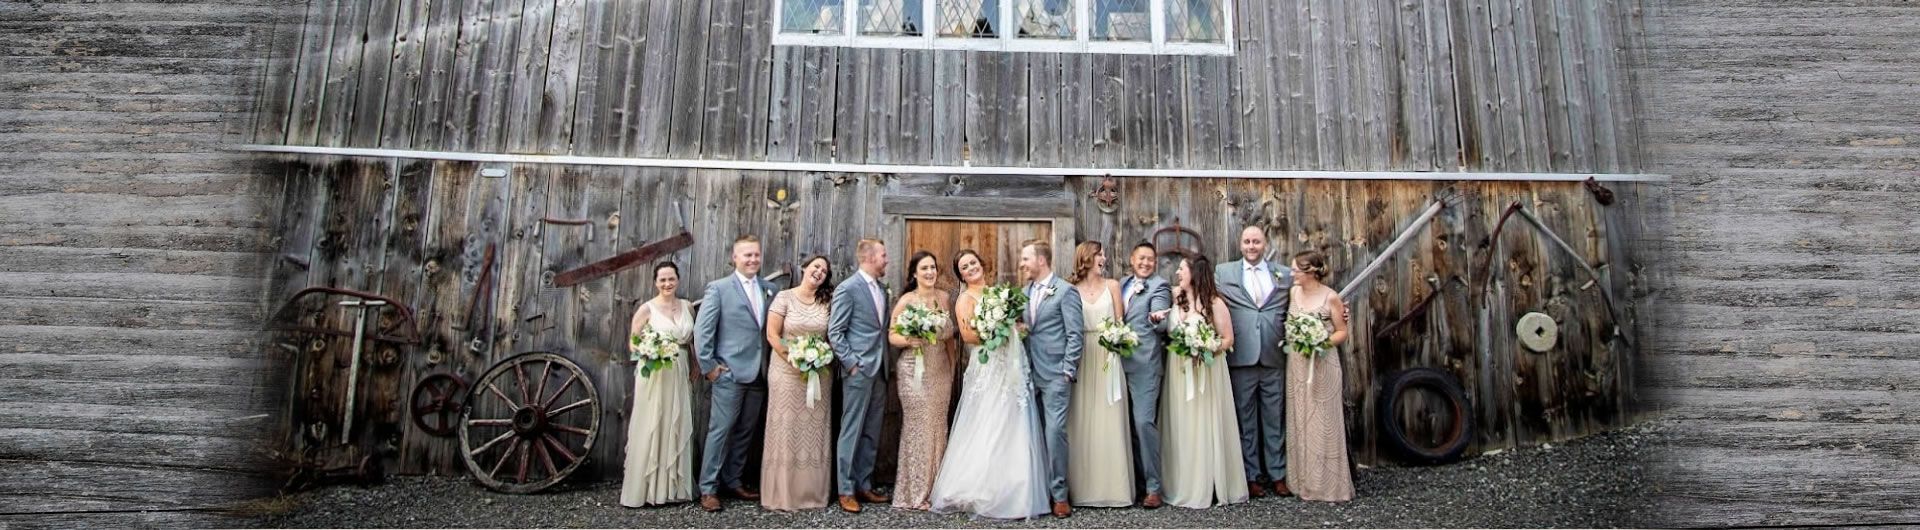 Wedding party posing in front of barn